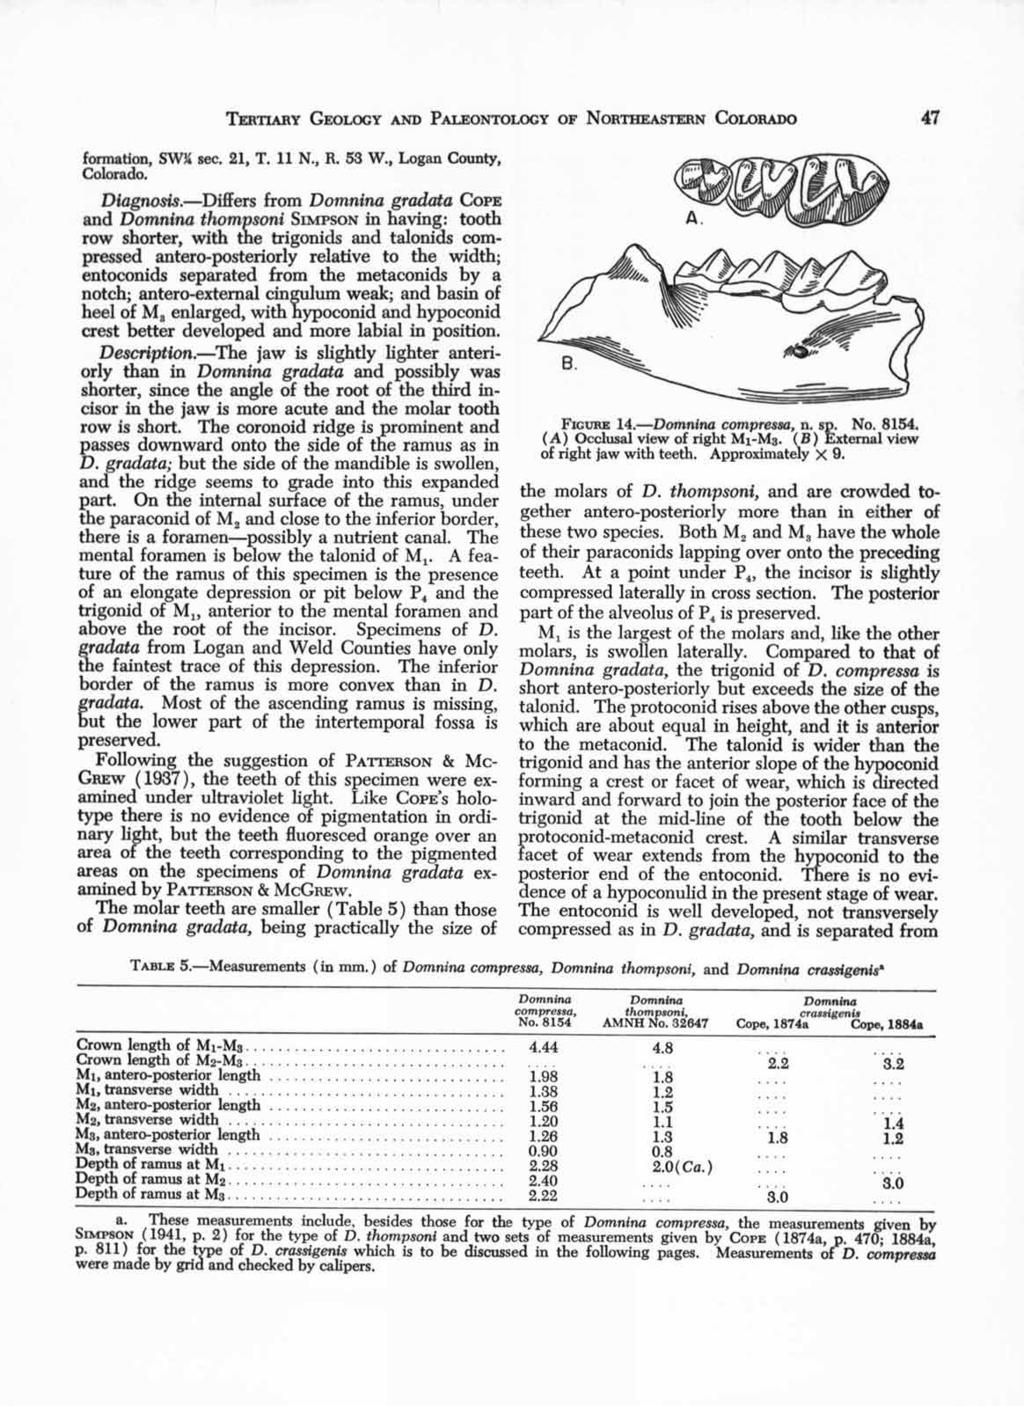 TERTIARY GEOLOGY AND PALEONTOLOGY OF NORTHEASTERN COLORADO 47 formation, SW34 sec. 21, T. 11 N., R. 53 W., Logan County, Colorado. Diagnosis.